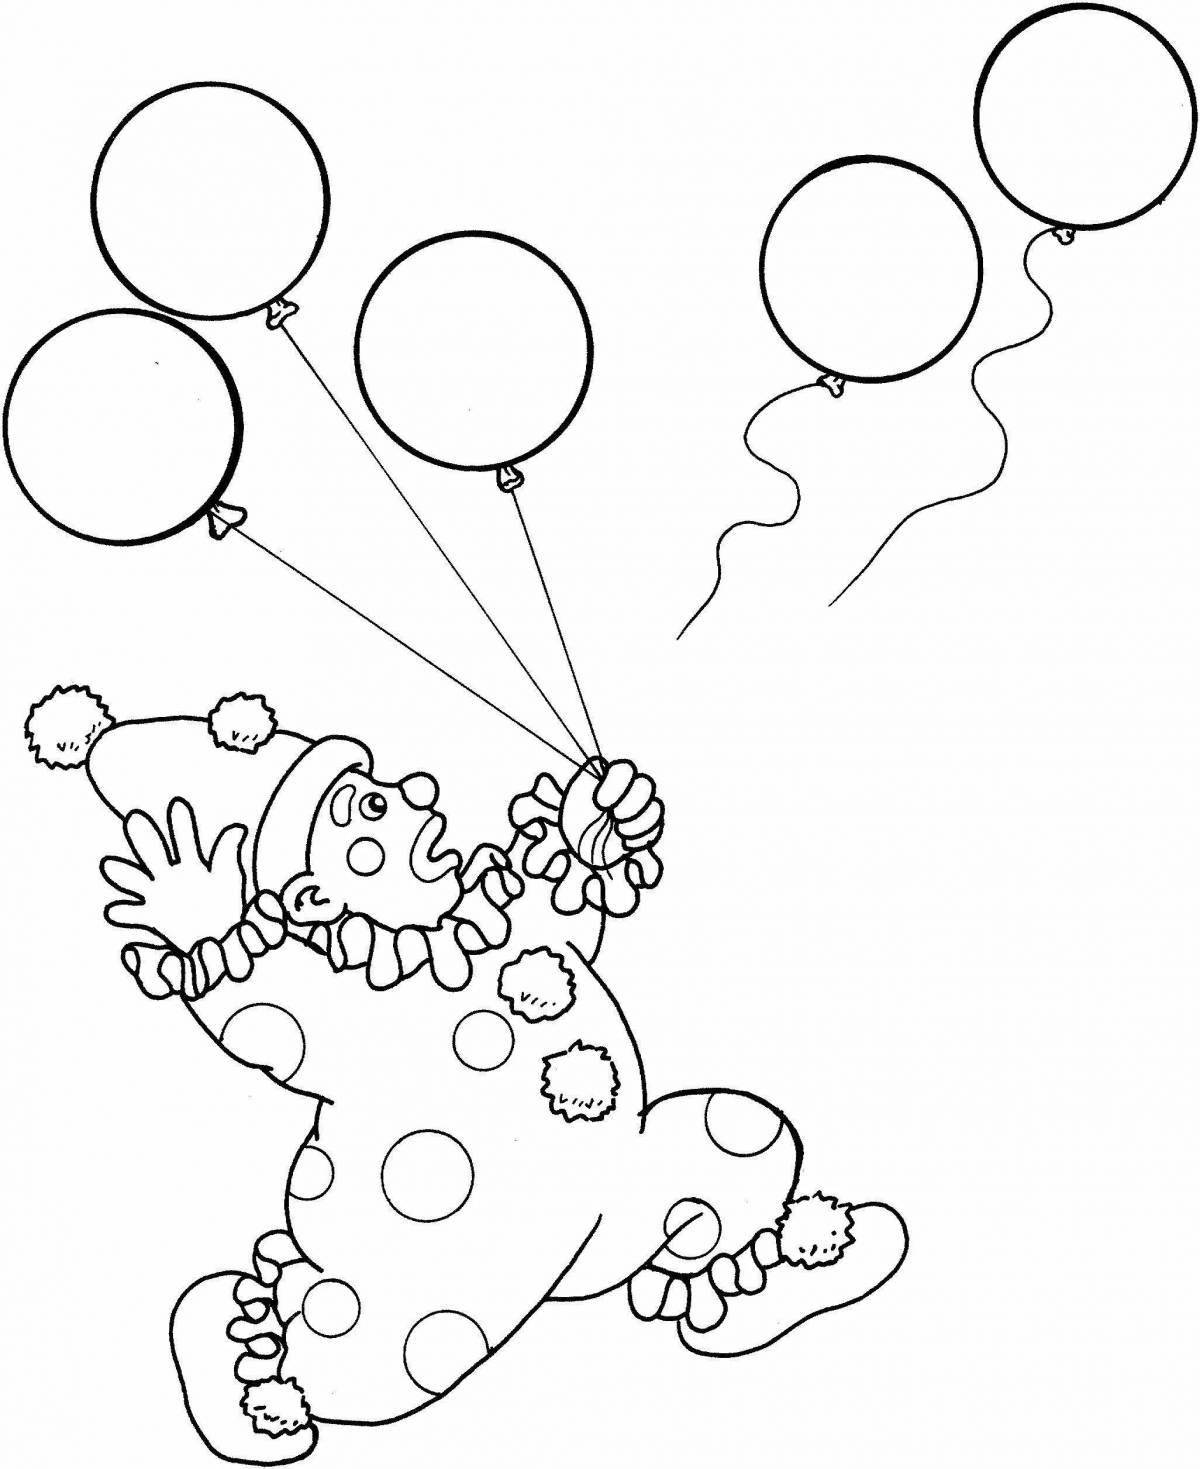 Glowing ball coloring book for 4-5 year olds